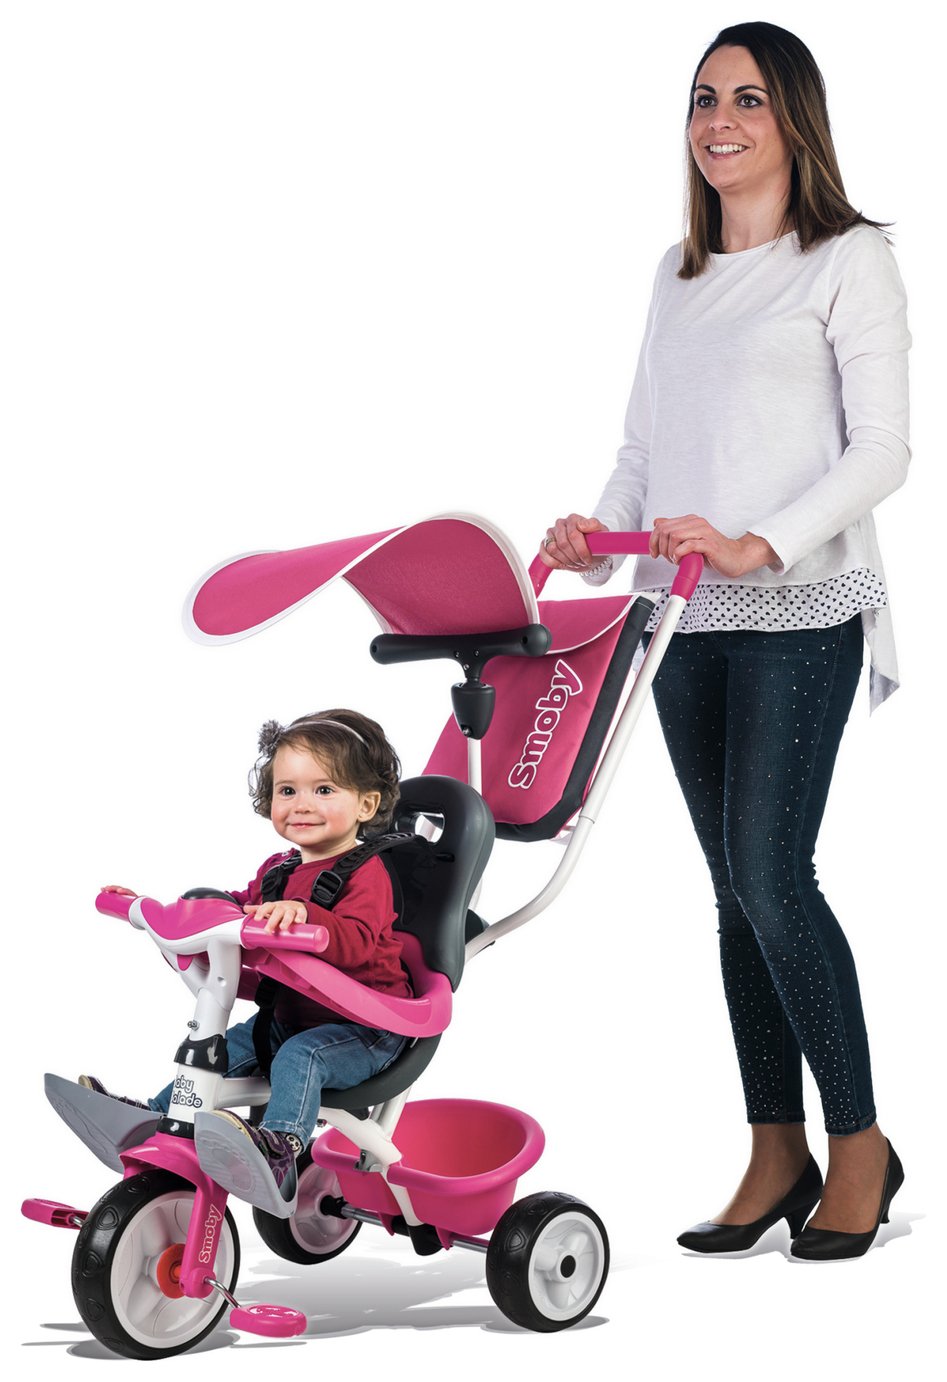 Smoby 3 in 1 Trike - Pink